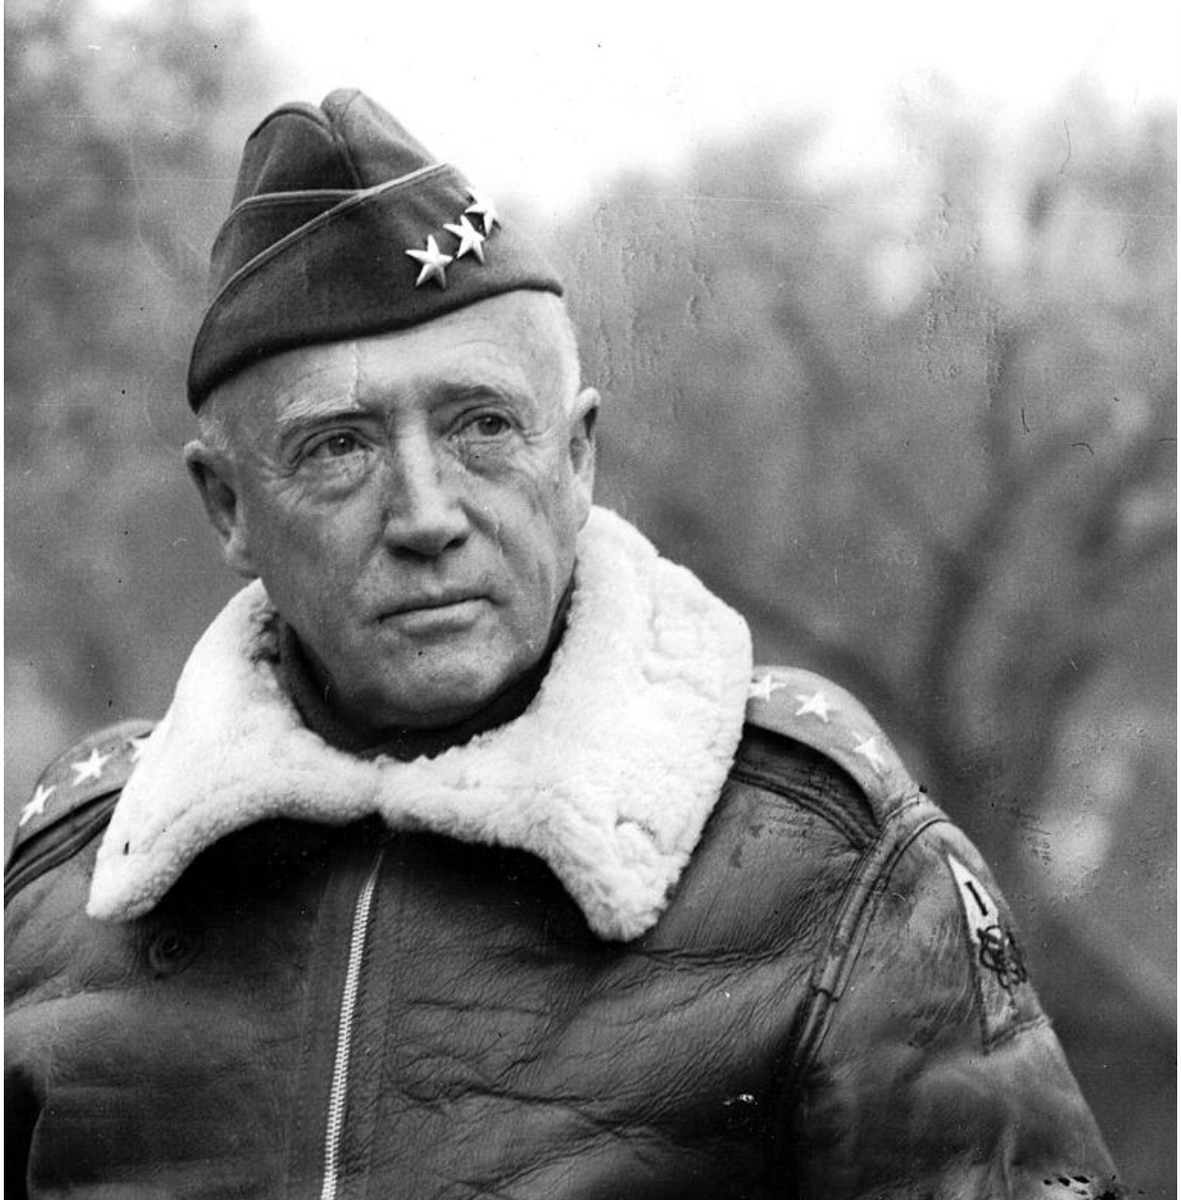 [3 of 9]Patton's Third Army is called in to try to cut the Panzer Divisions off from the South.